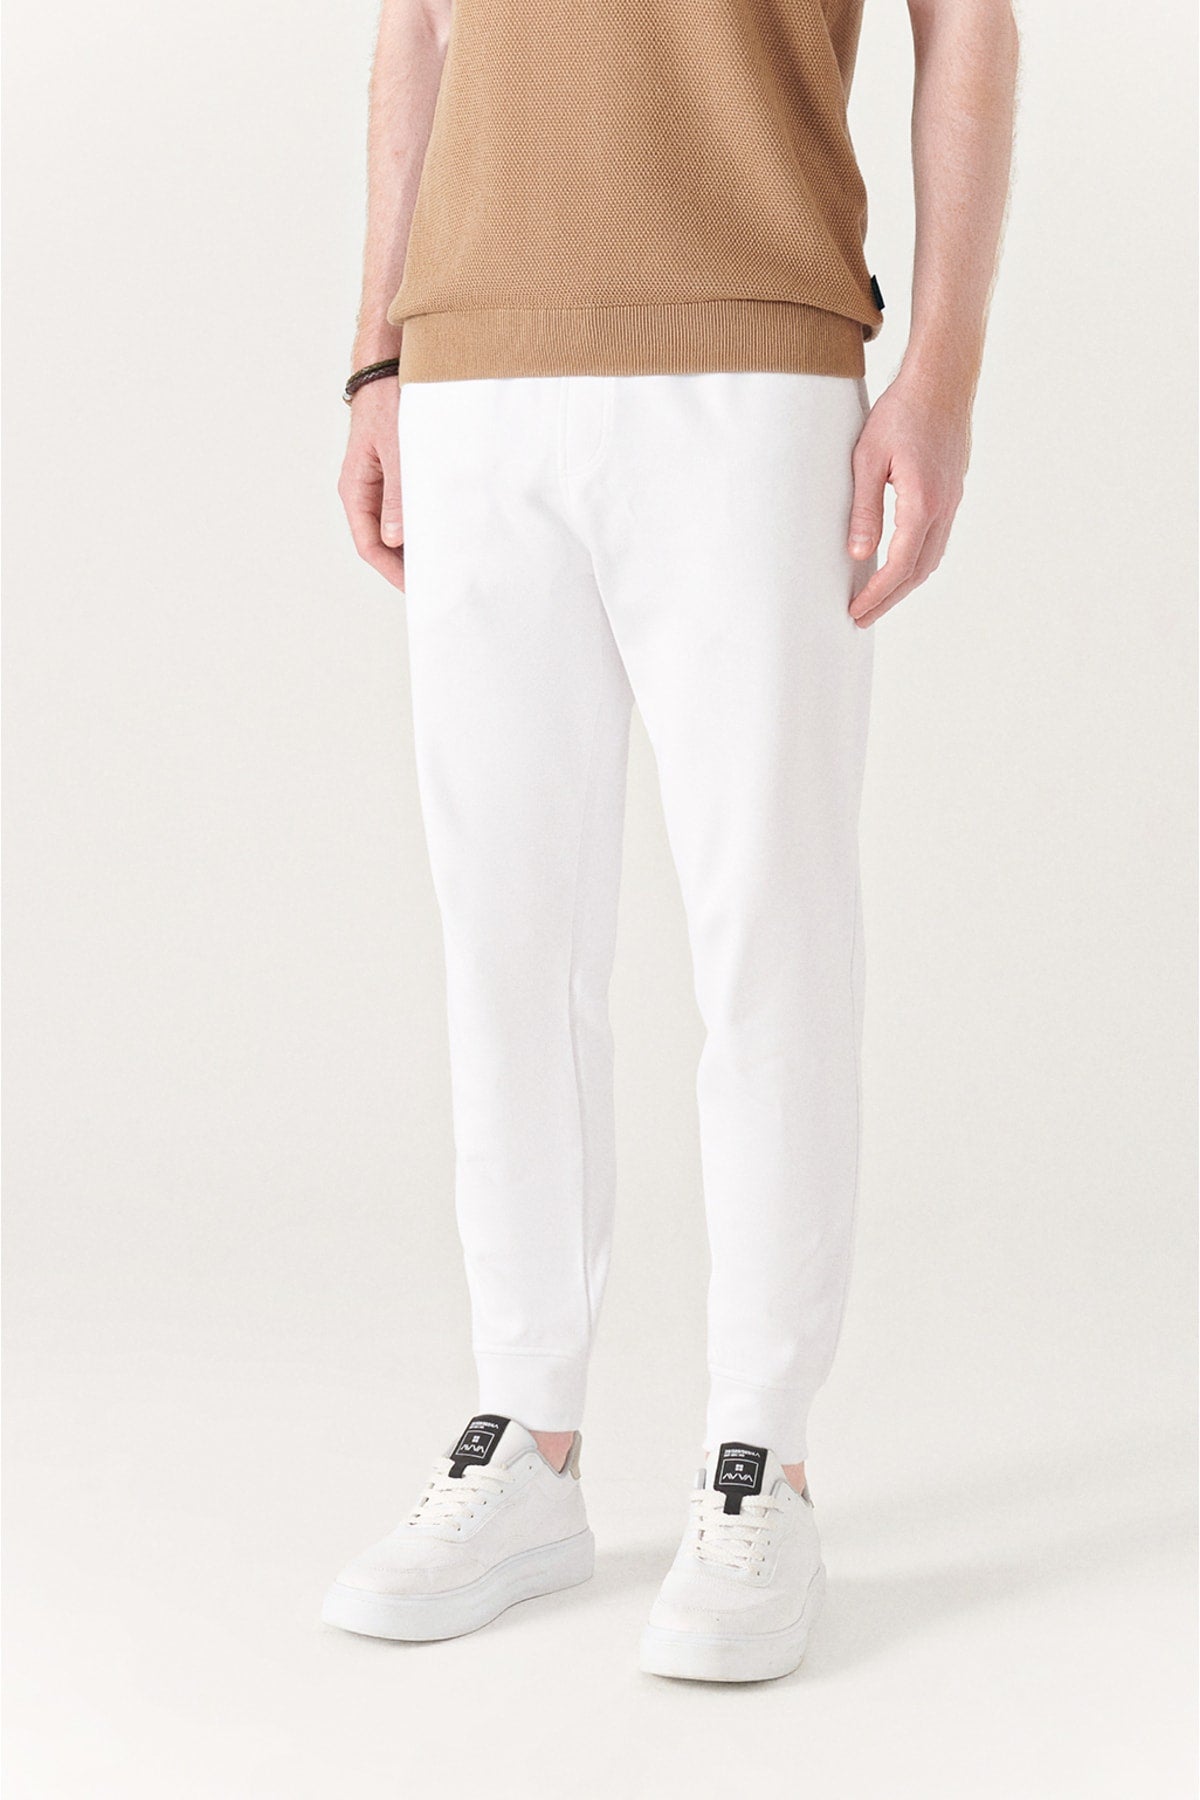 Men's white textured jogger A21y3409